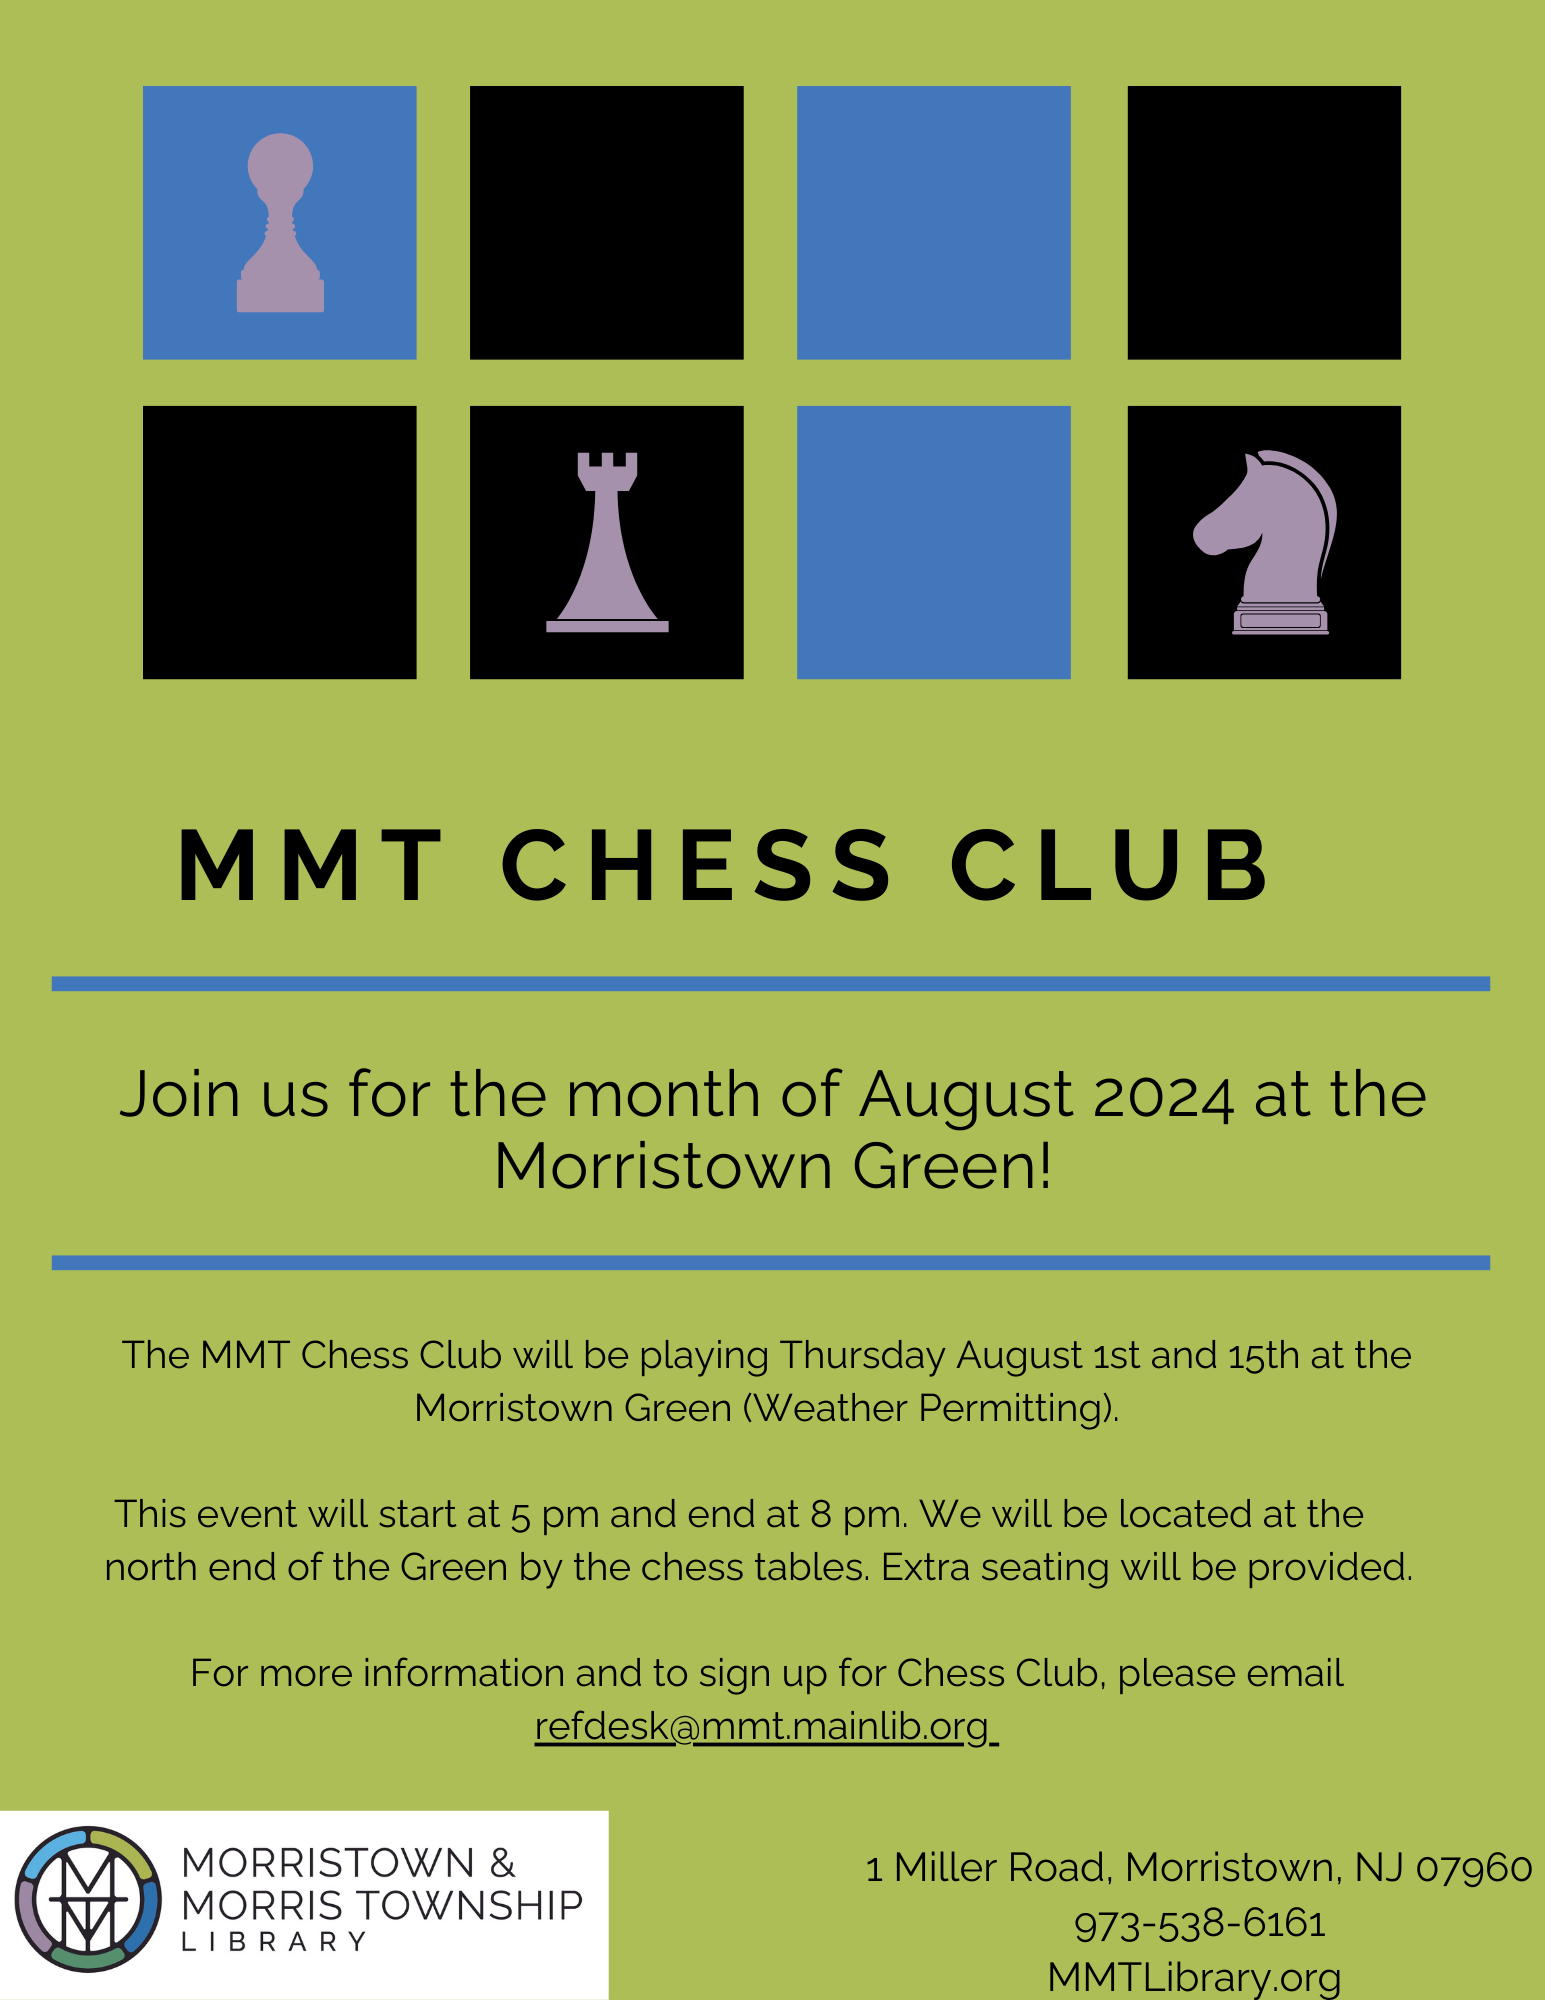 Chess on the Green!